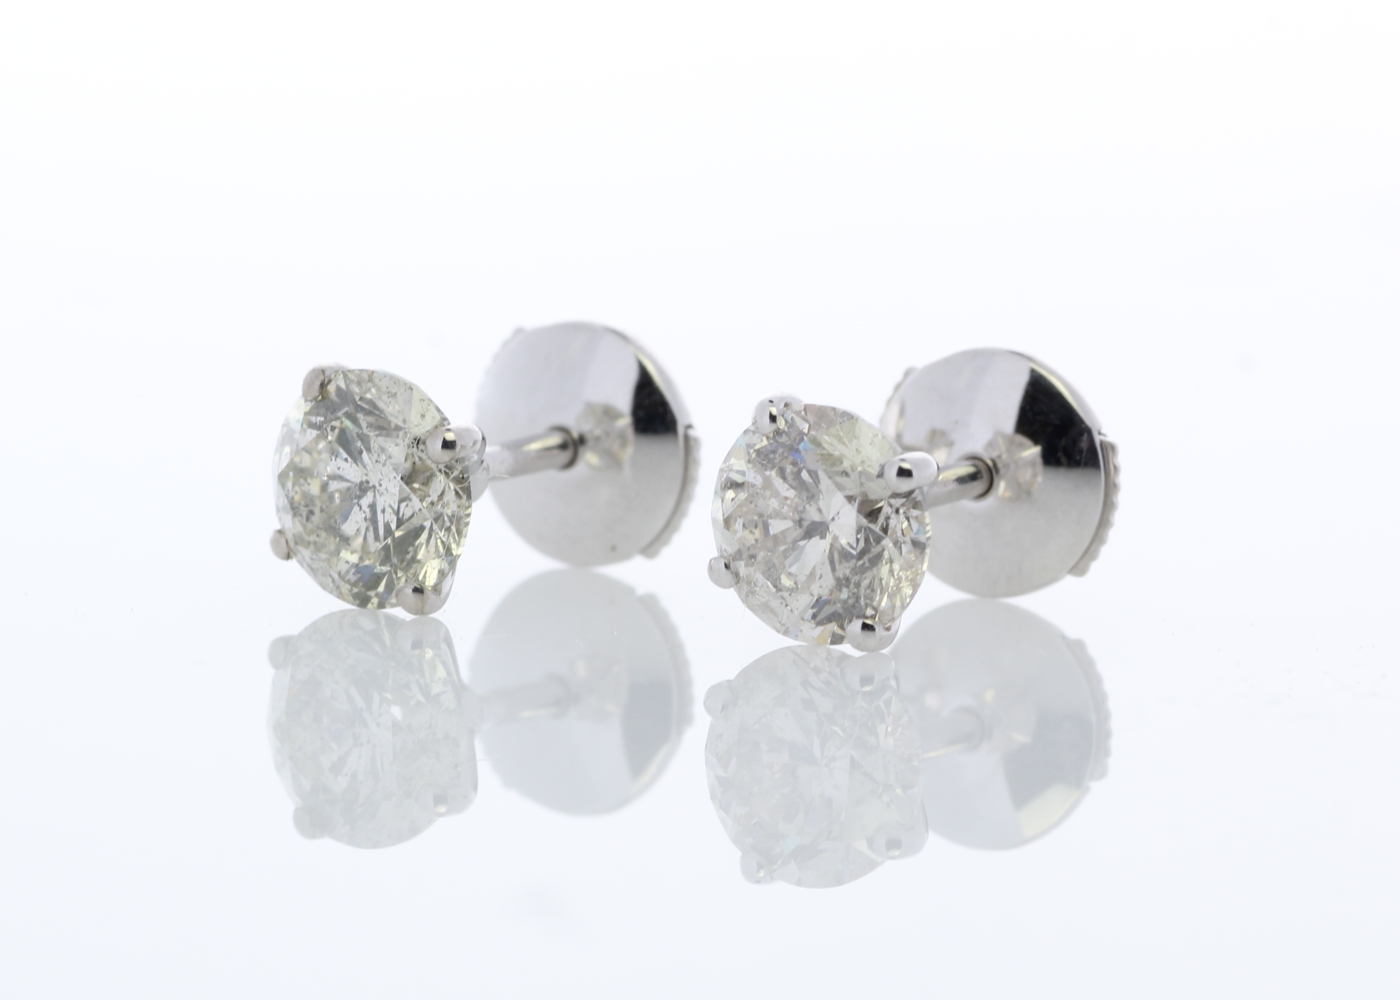 18ct White Gold Claw Set Diamond Earrings 2.34 Carats - Image 3 of 4